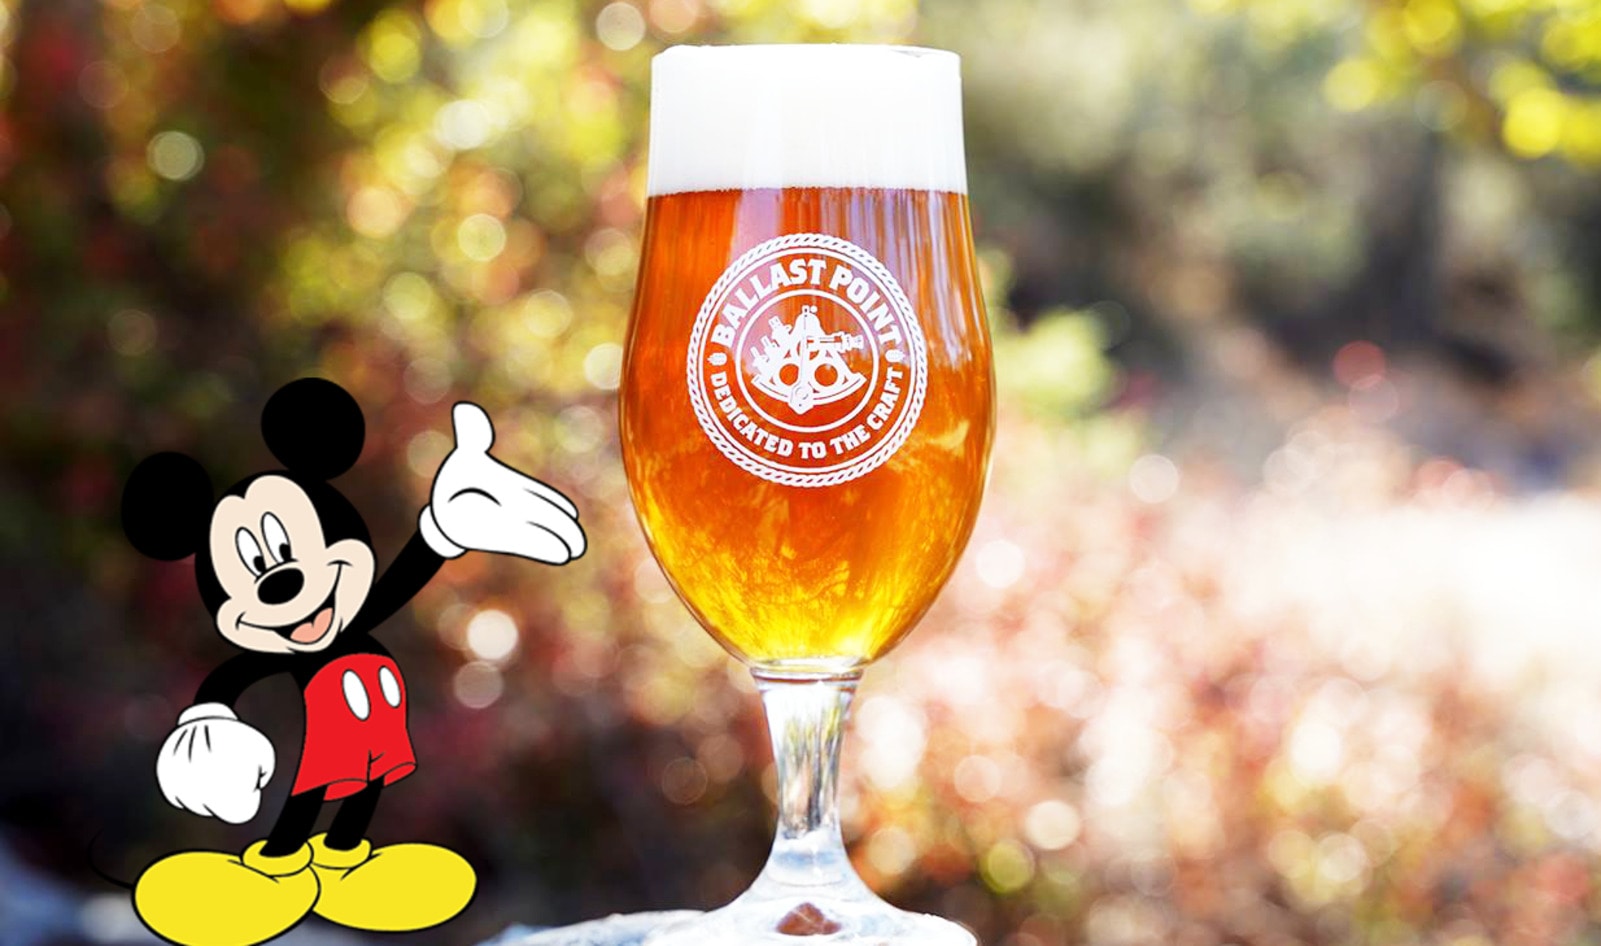 Disneyland Opens Its First Craft Brewery with Vegan Options Galore